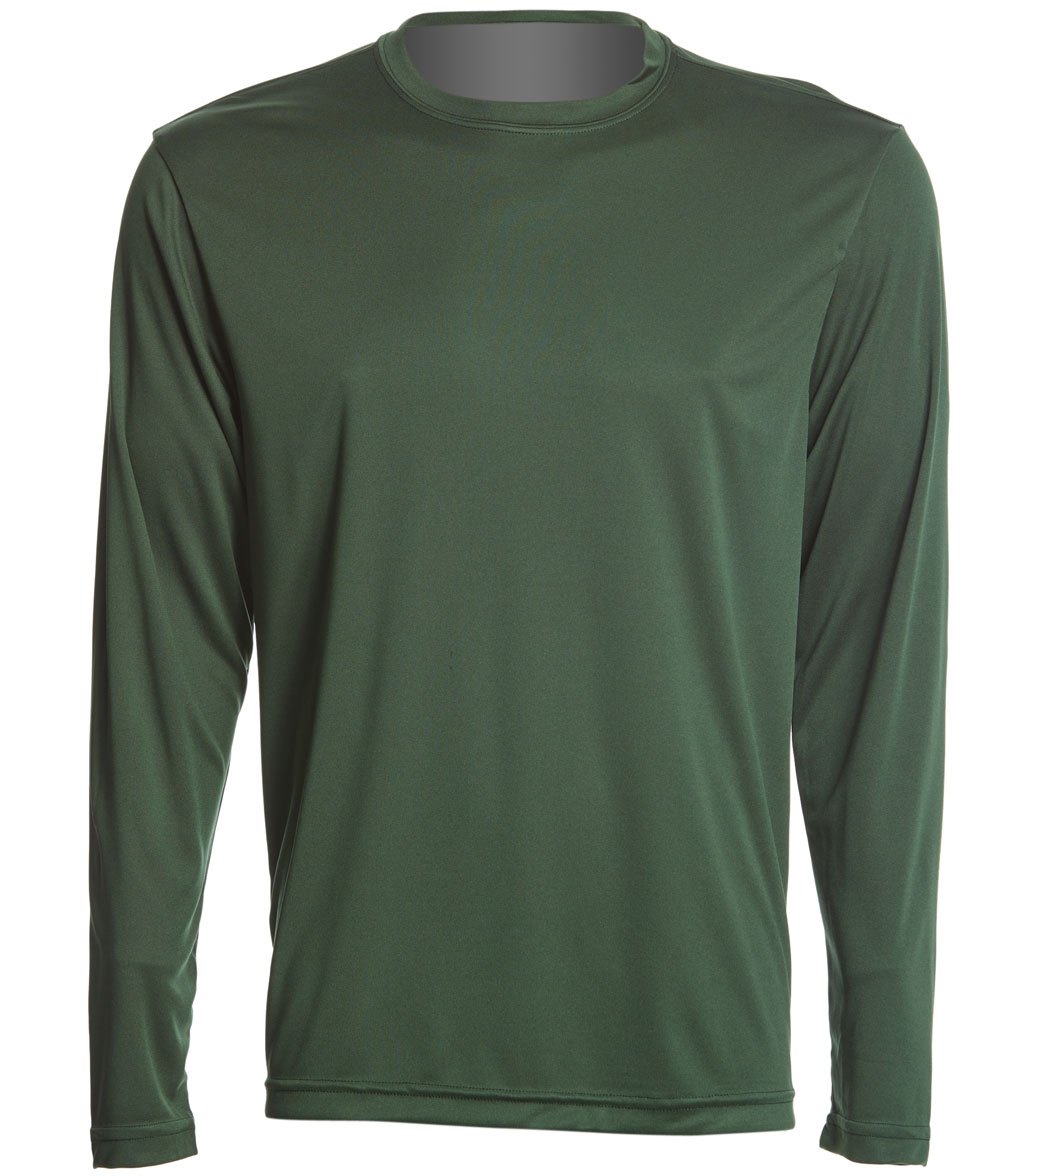 Men's Long Sleeve Posicharge Competitortm Tee Shirt - Forest Green Large Polyester - Swimoutlet.com